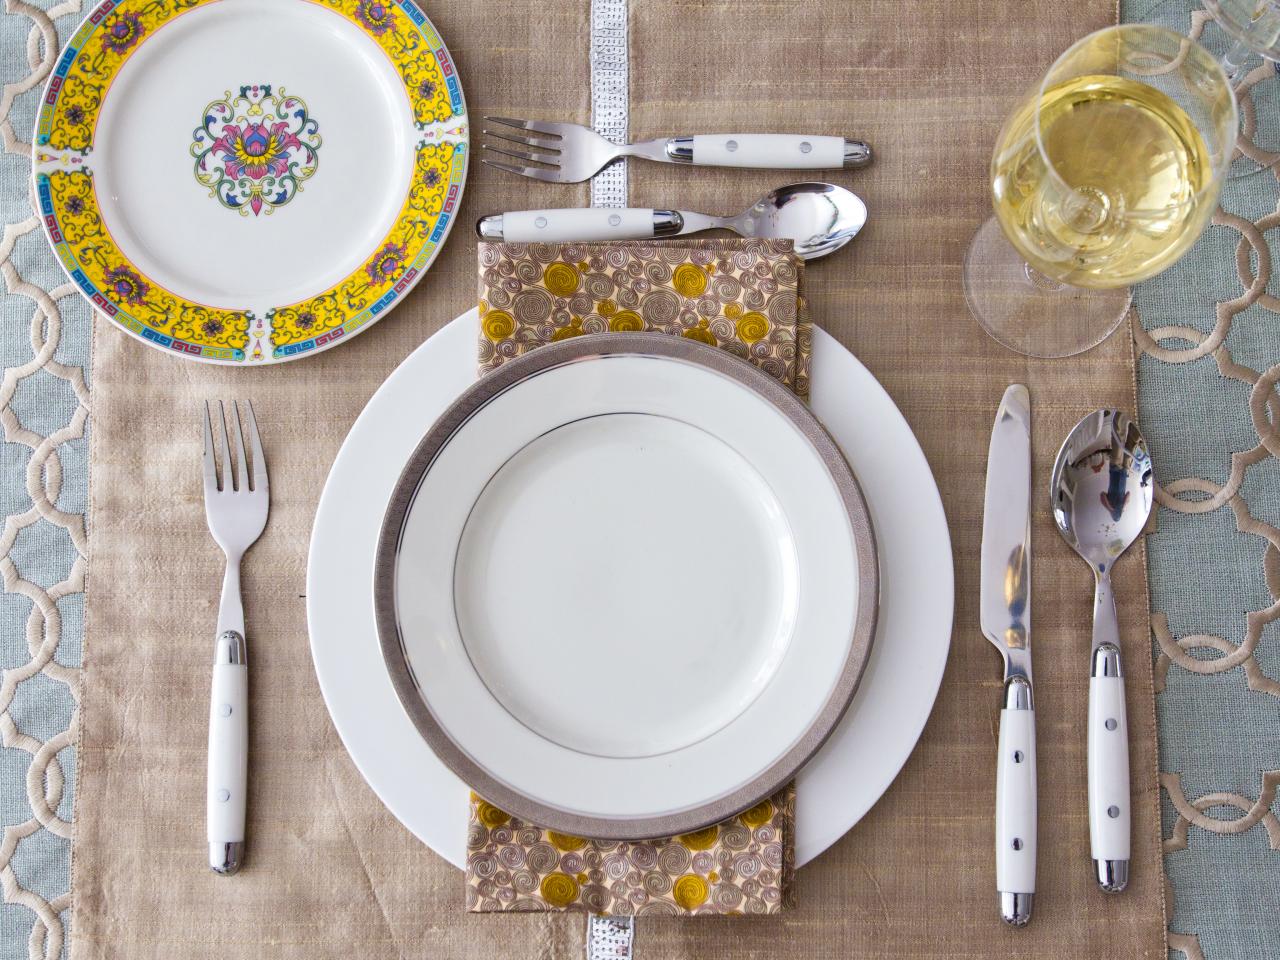 All that you need to know about table settings